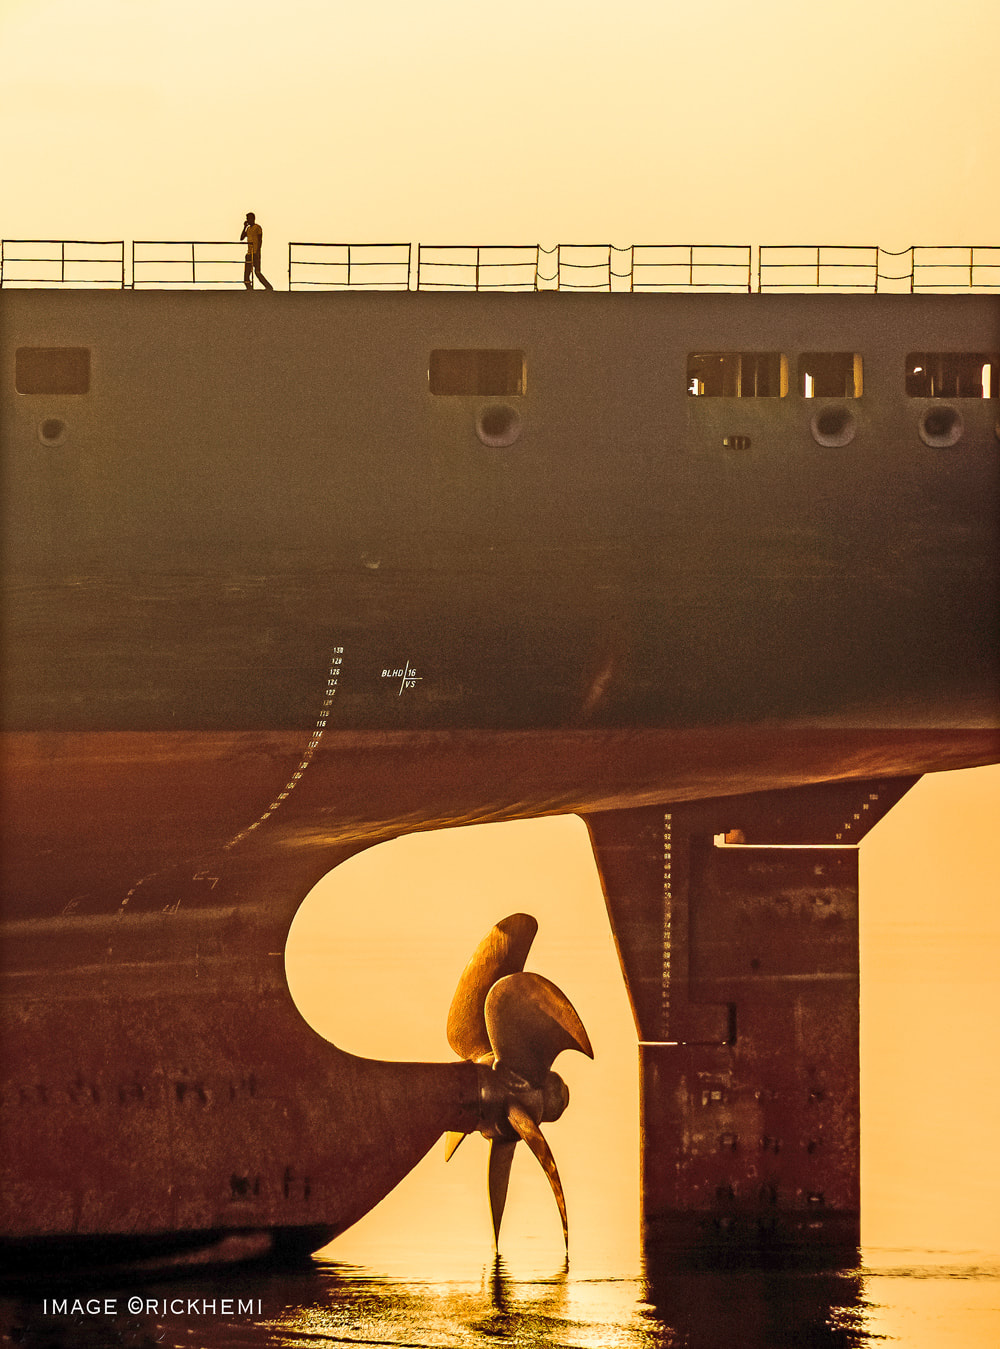 solo overland travel photography, ship salvaging, image by Rick Hemi